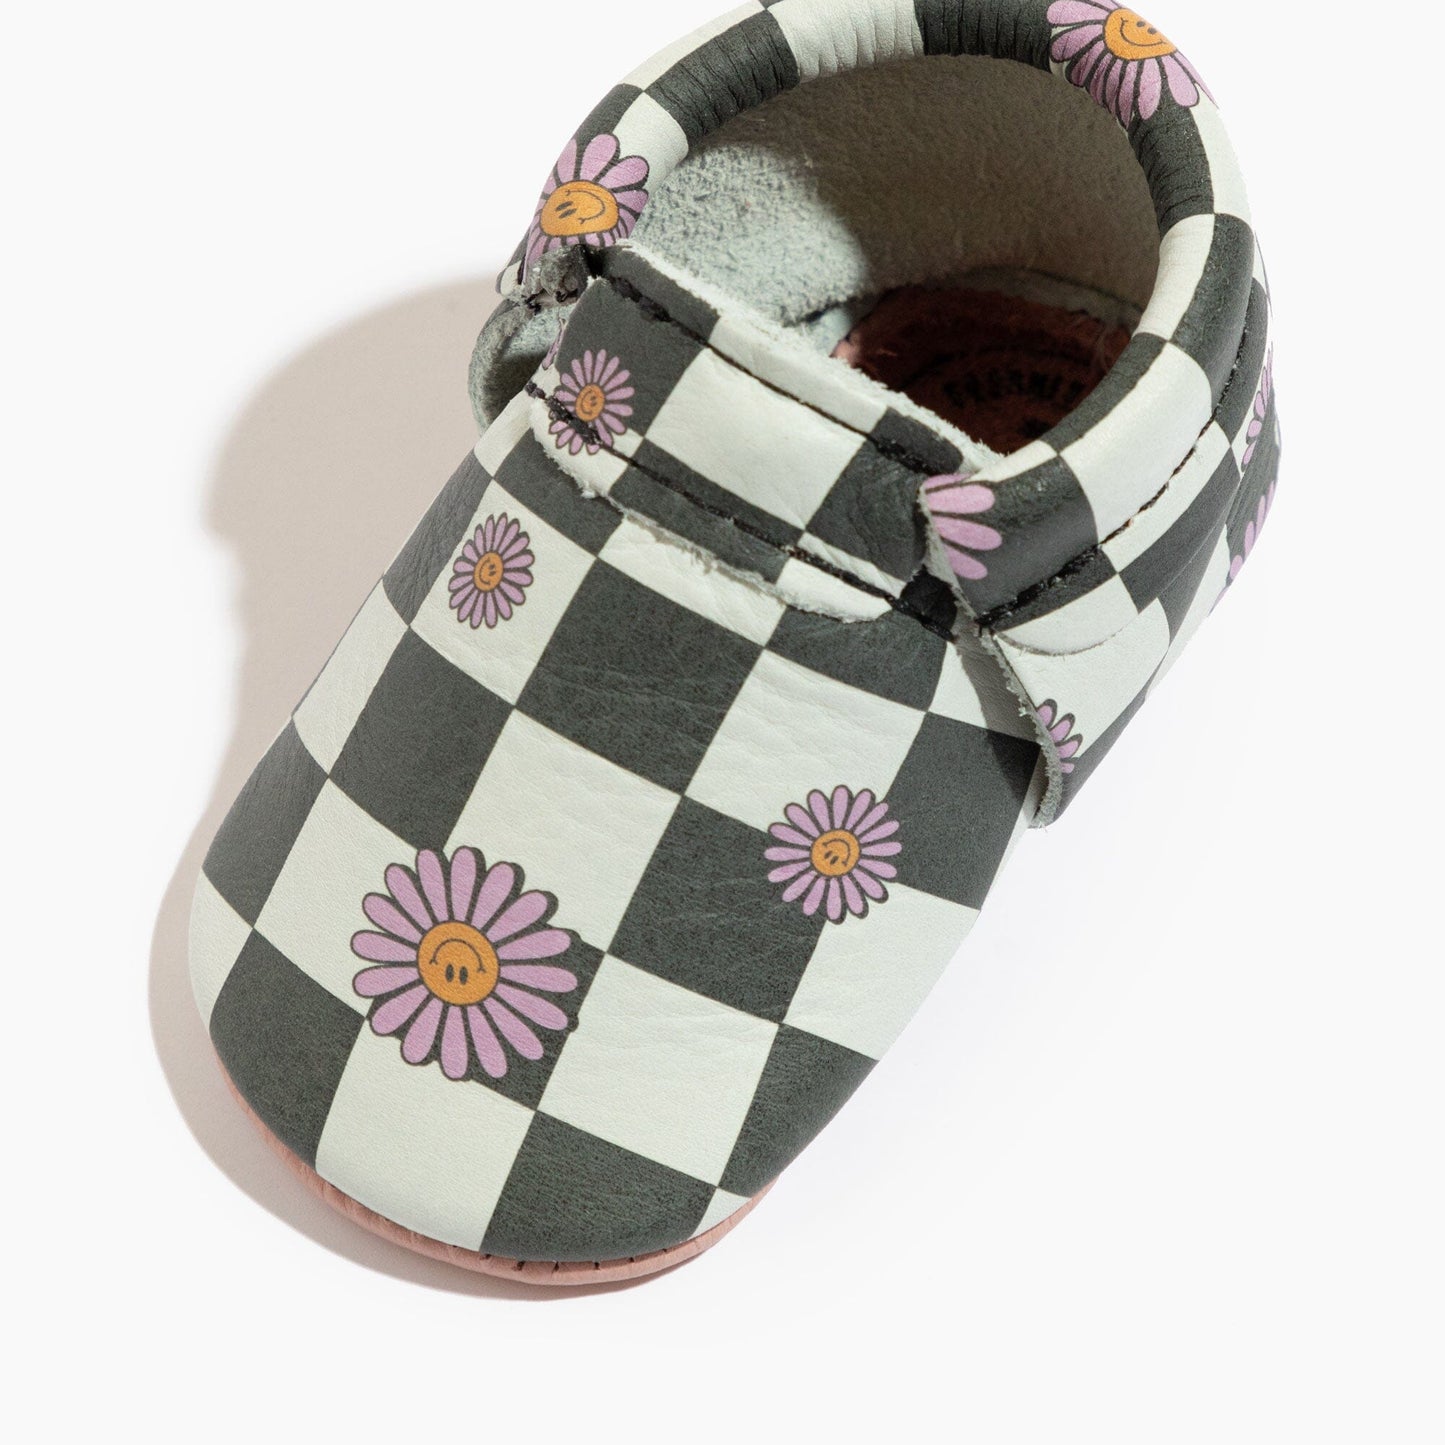 Flower Power Check City Baby Shoe City Mocc Soft Sole 